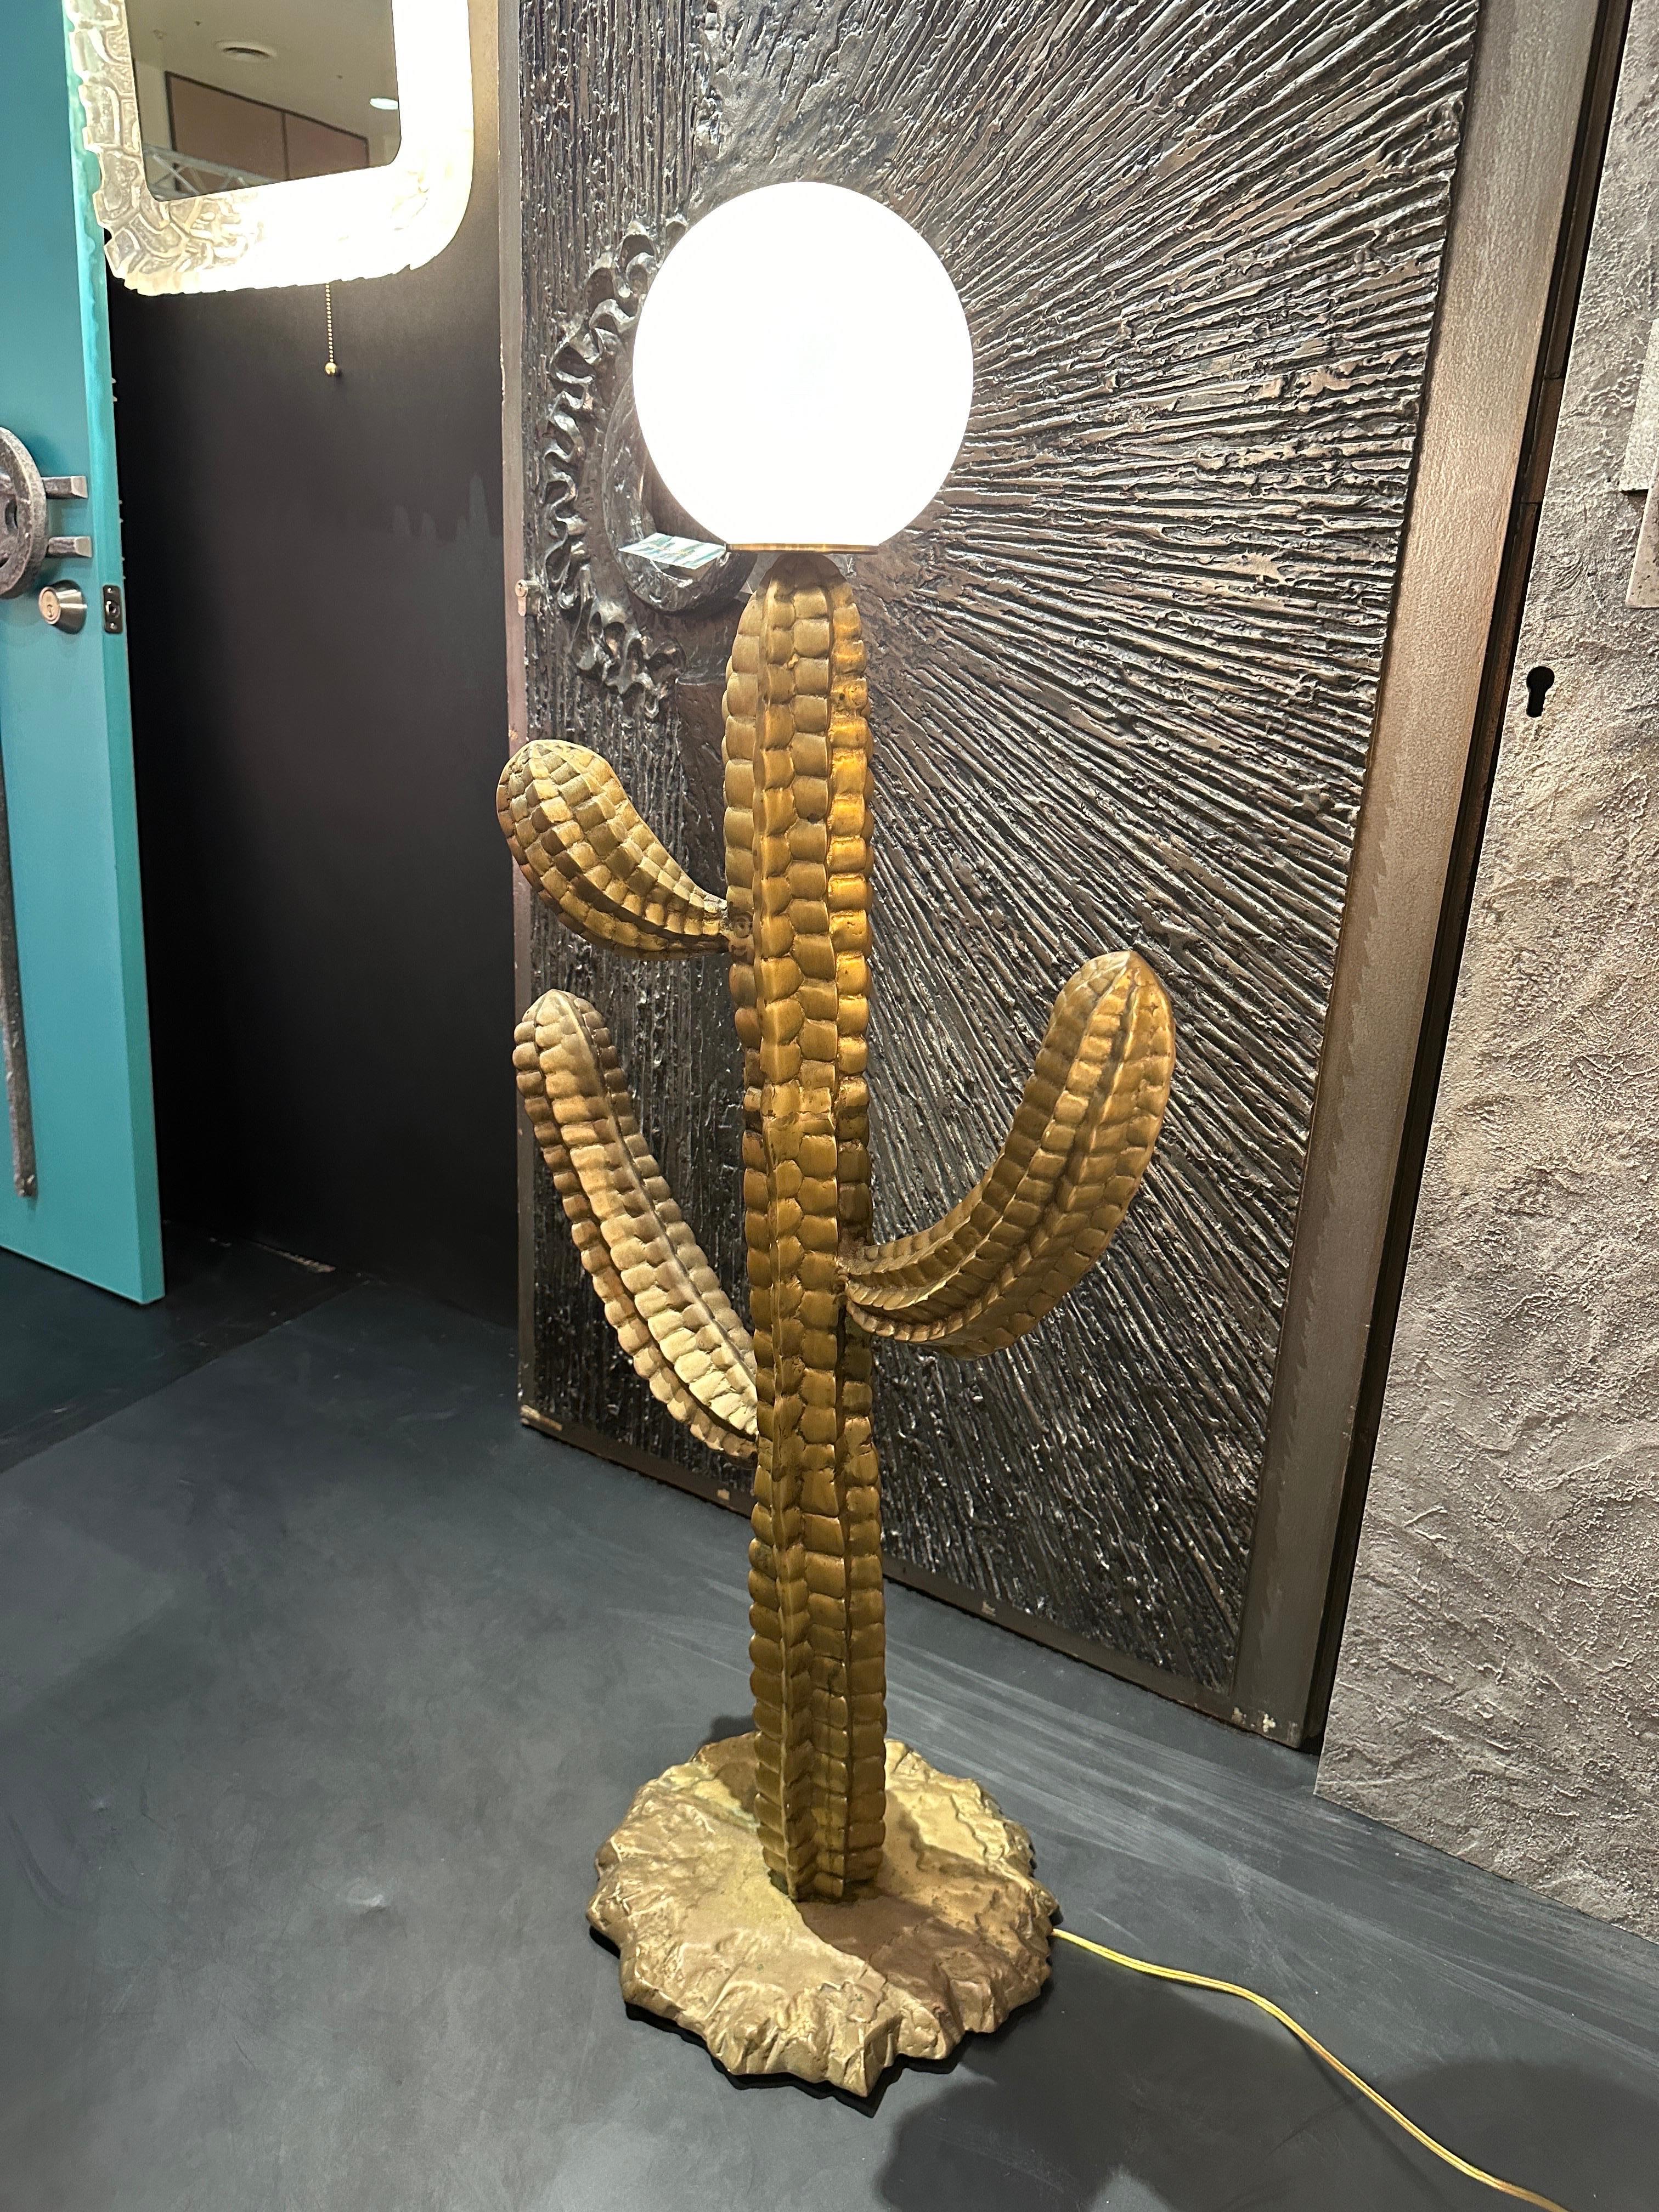 Large brass cactus sculpture from 70’s mounted as floor lamp.
Only cactus is 40